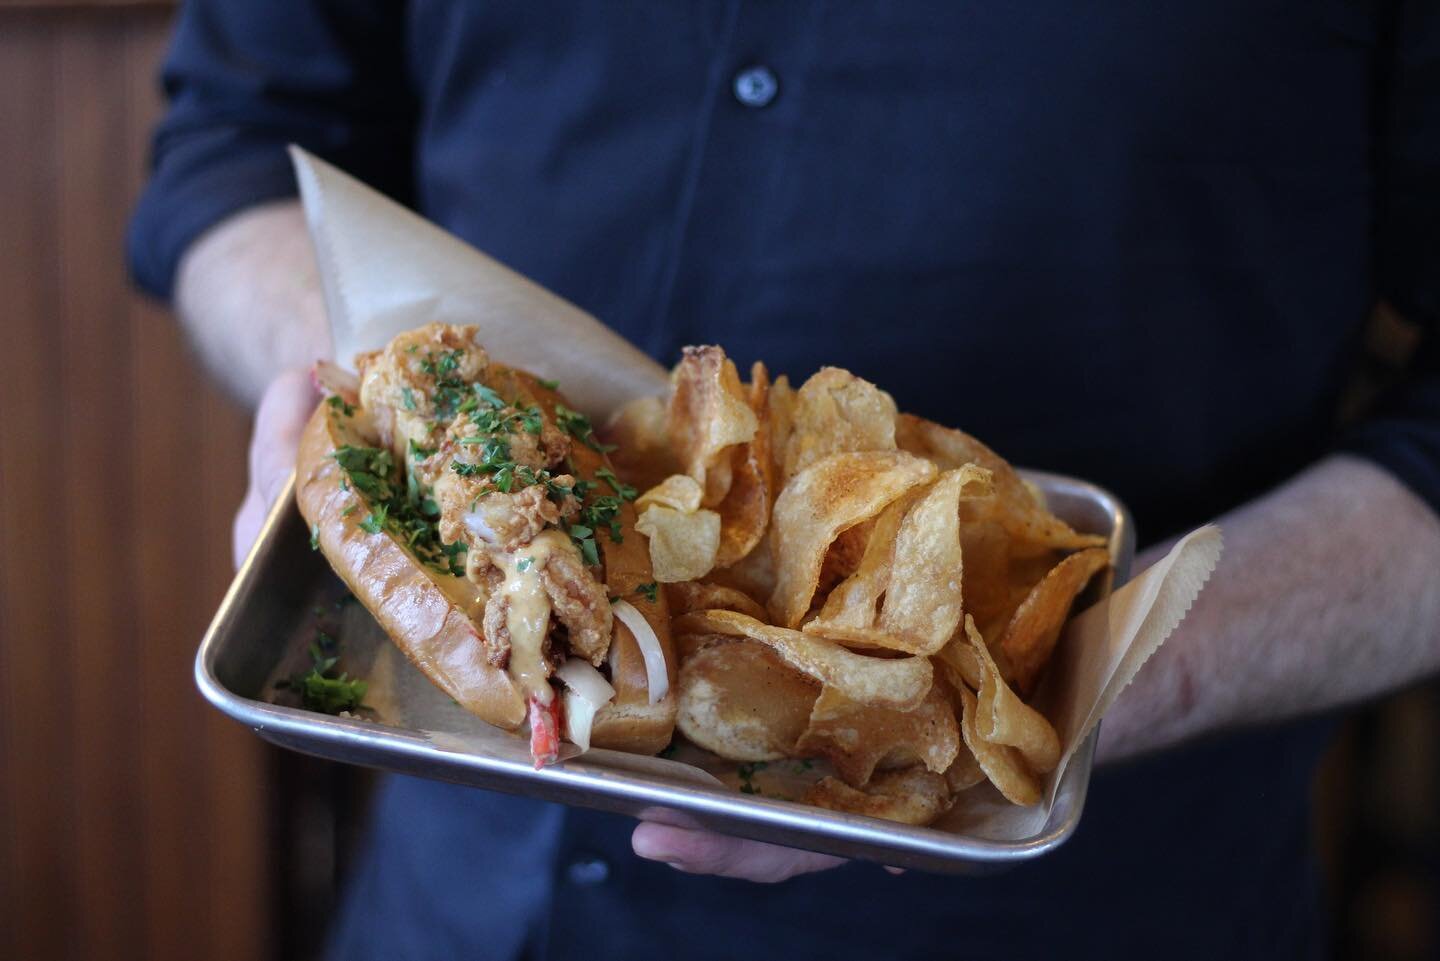 Our Shrimp Po&rsquo;Boy is pretty amazing, you should come try one! Available for lunch and dinner. See our full menu and order online at www.patconnollytavern.com/menu